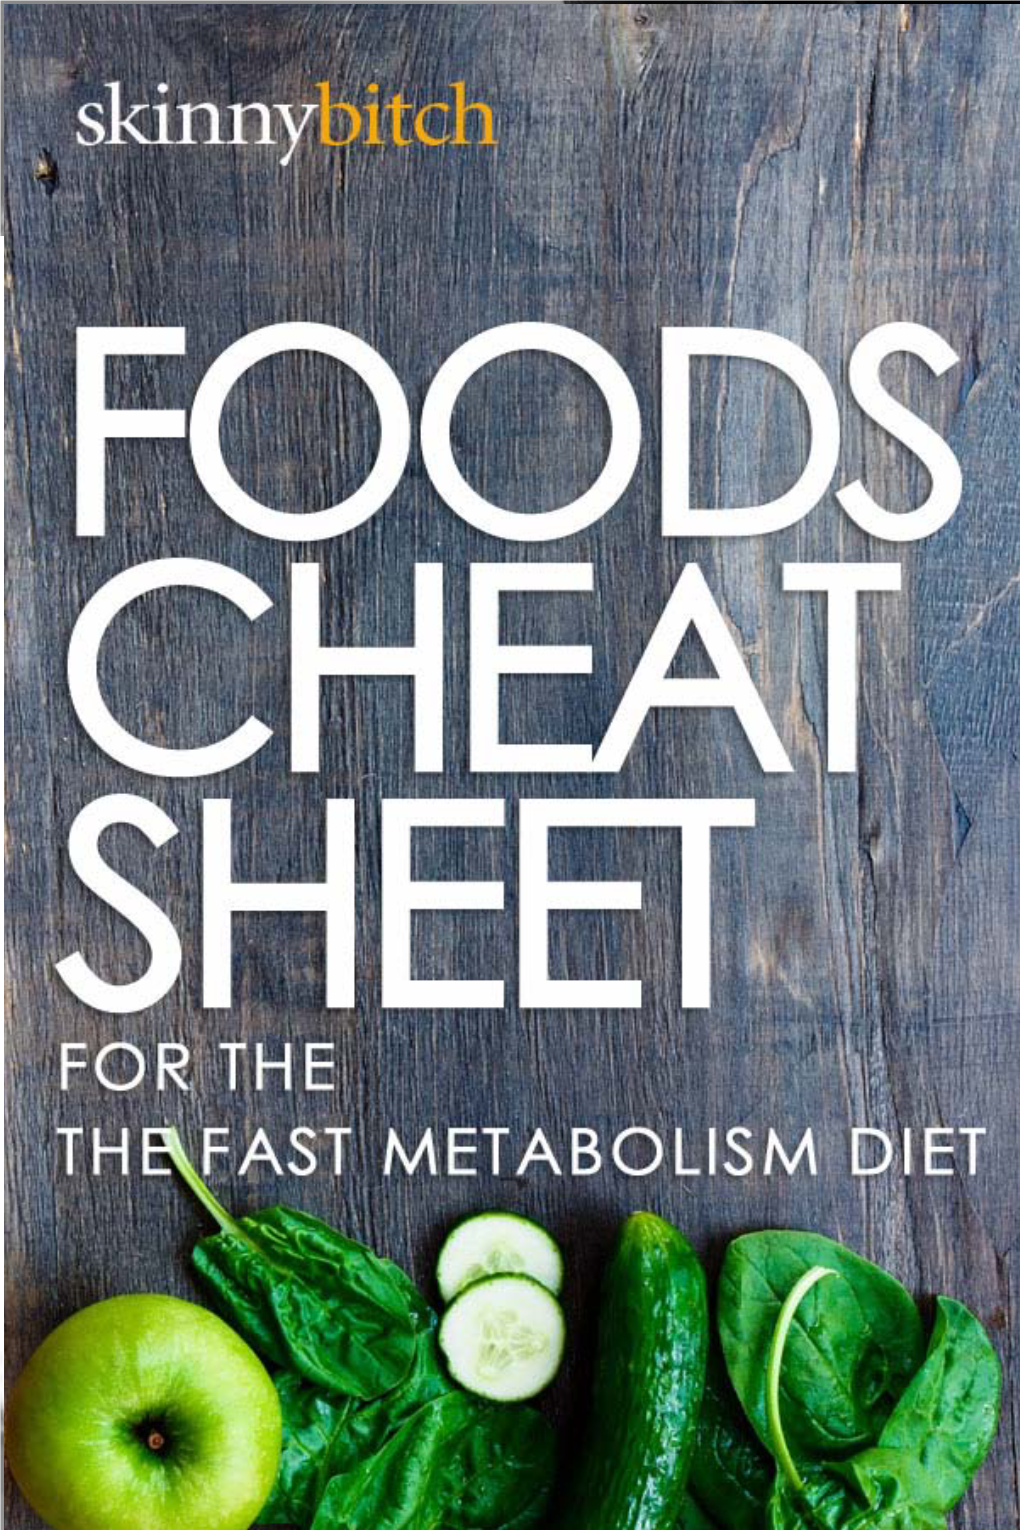 Foods Cheat Sheet ©Skinnybitch.Net for the Fast Metabolism Diet